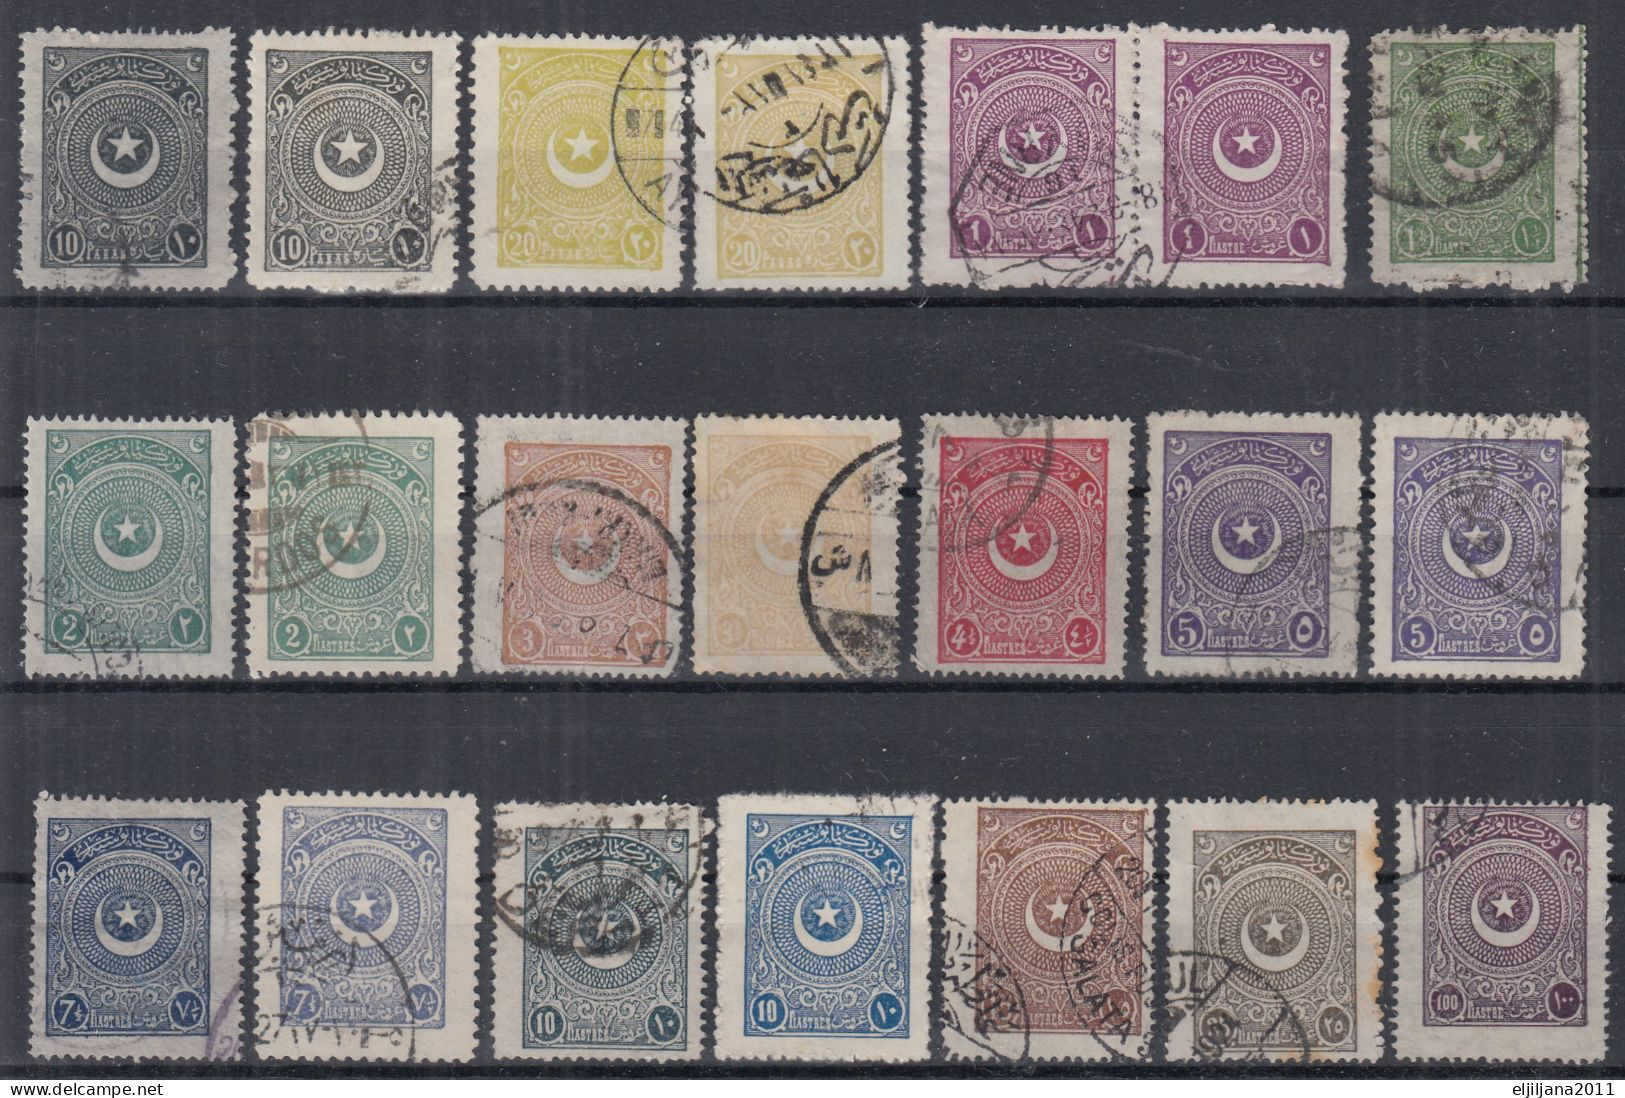 Action !! SALE !! 50 % Turkey / Türkei 1923 - 1925 ⁕ Star And Crescent In A Circle ⁕ 21v Used / Shades - Different Perf. - Oblitérés